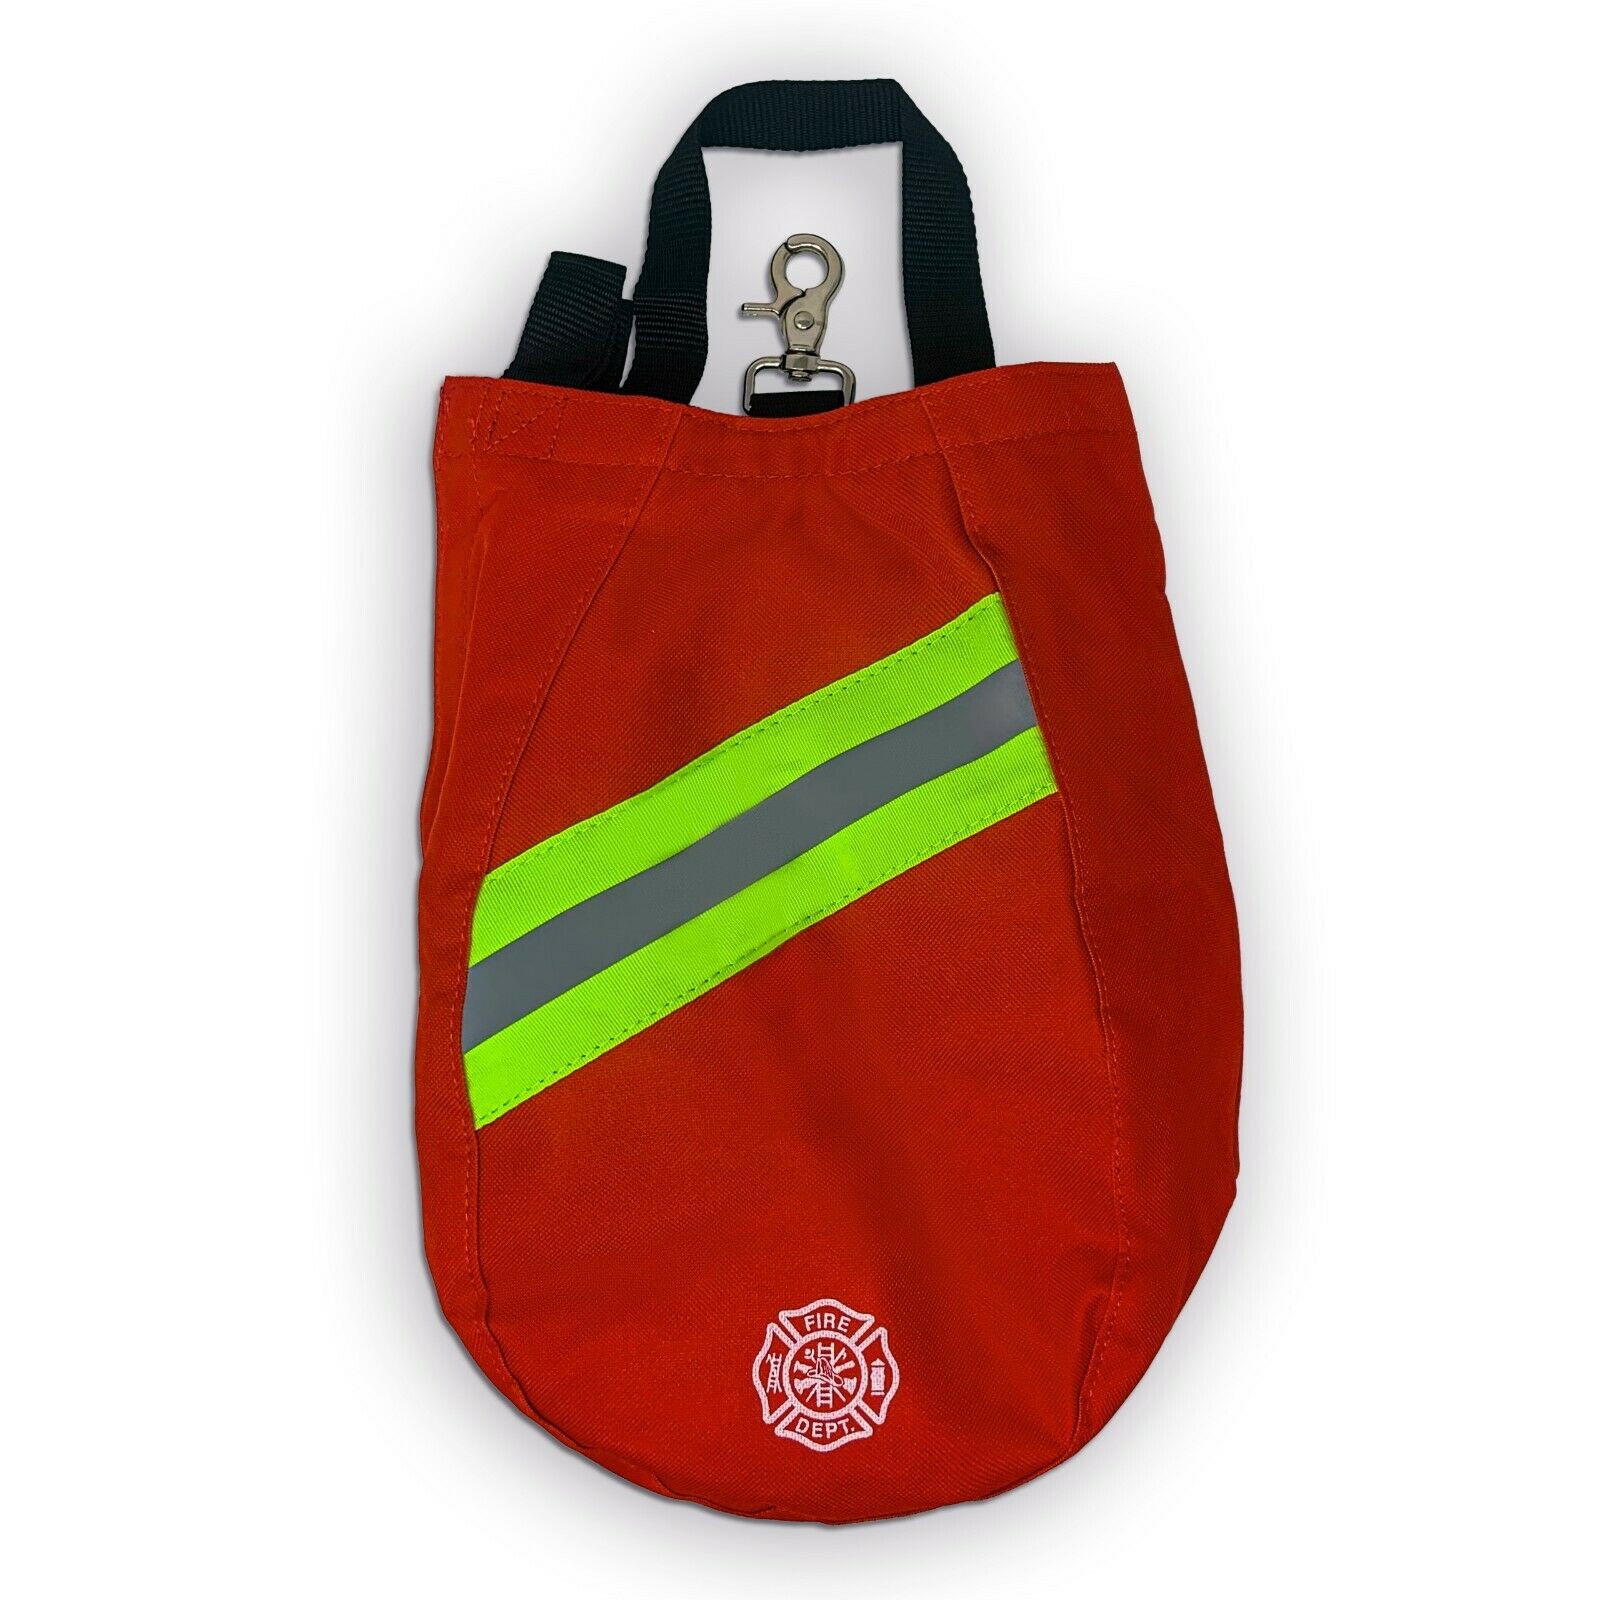 Scba Mask Bag, 2020 Deluxe Version, Red, Firefighter, Isi, Emt, Fire, Respirator